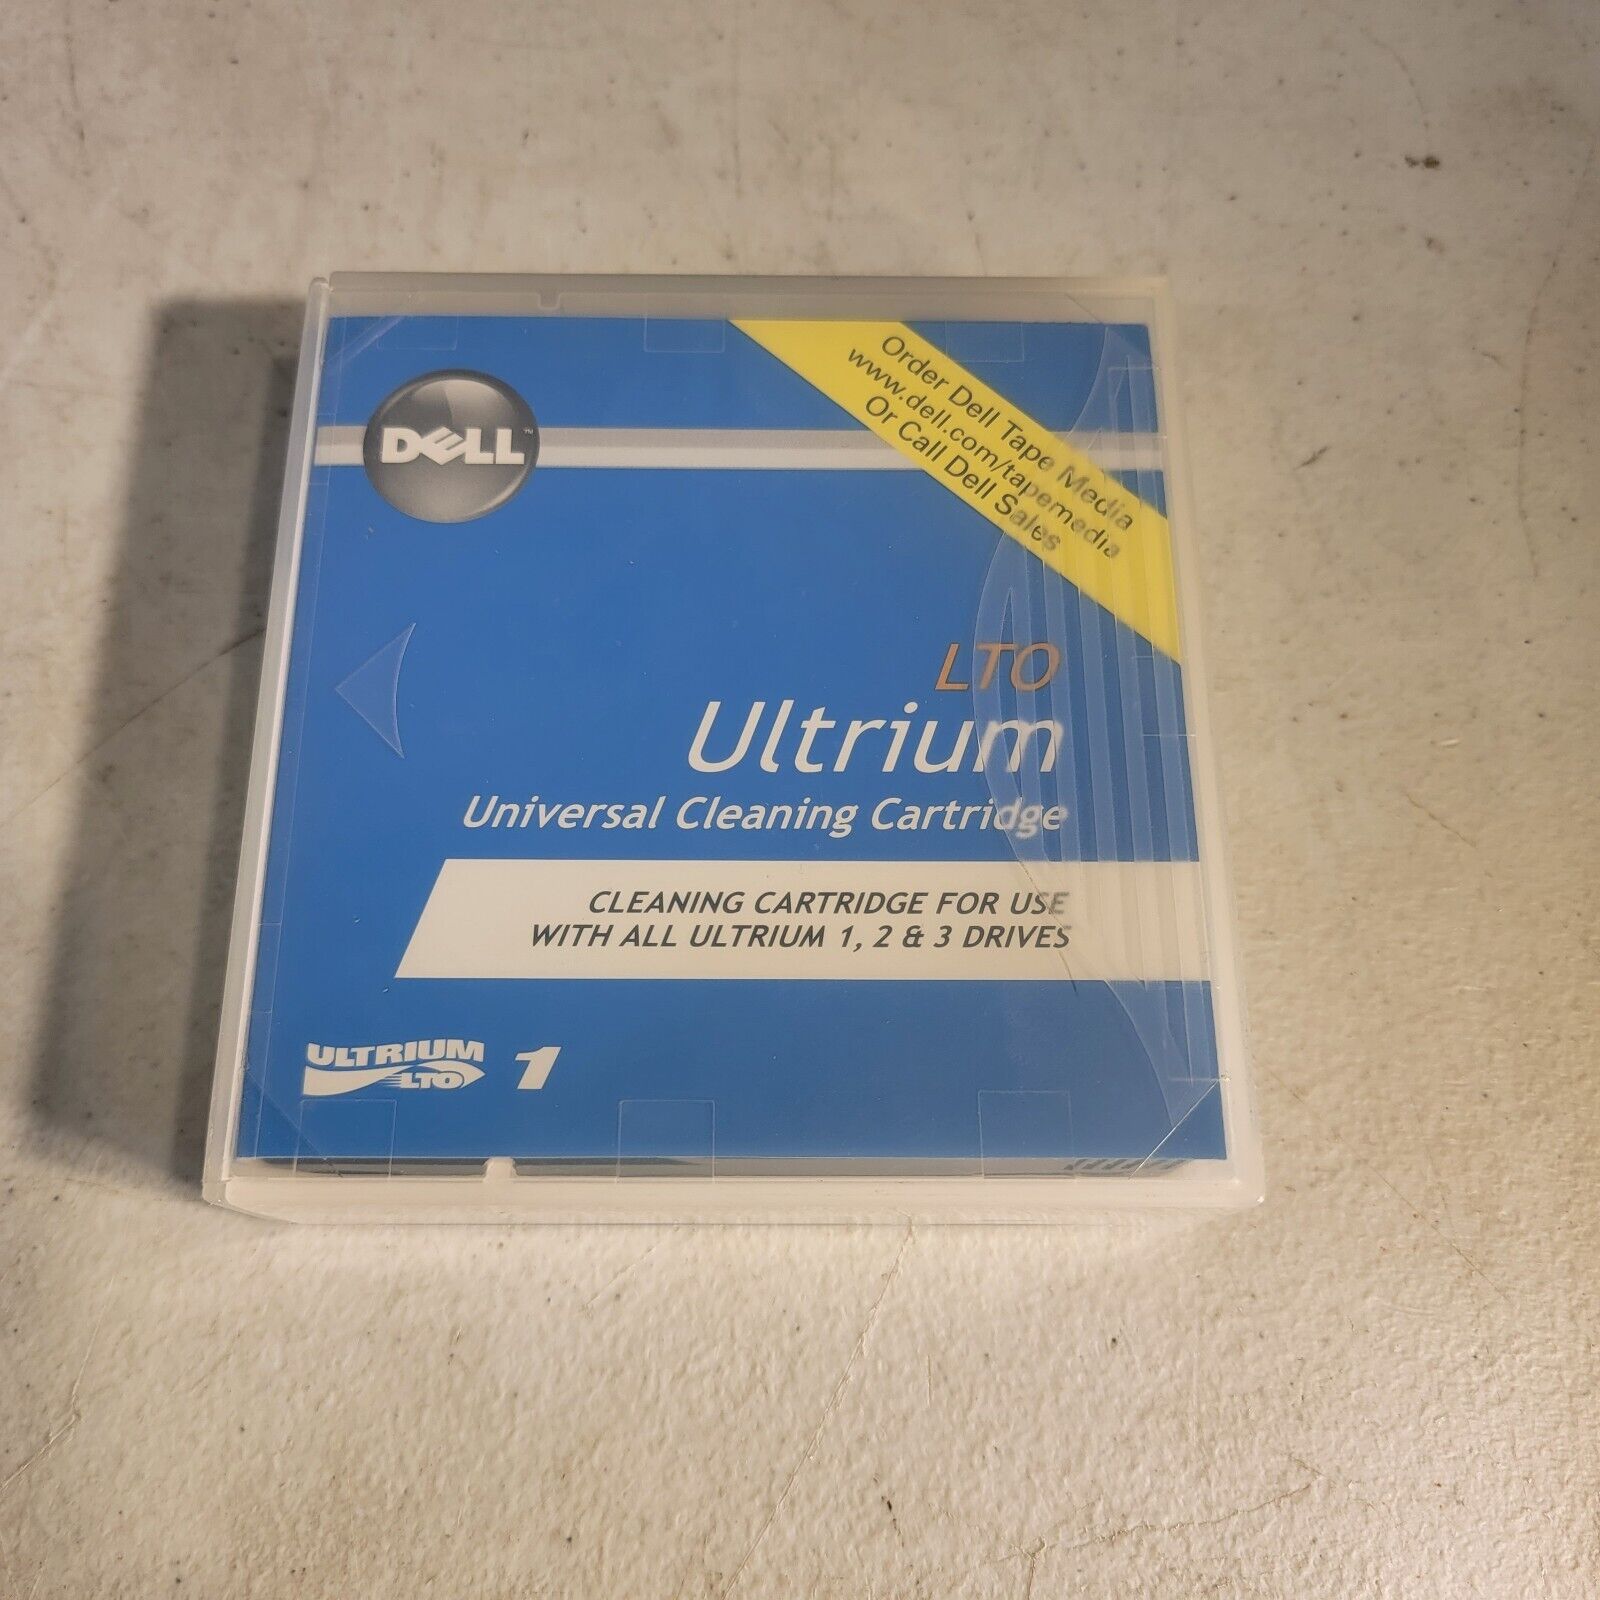 DELL 01X024 Ultrium Universal Cleaning tape Cartridges for All ULTRIUM